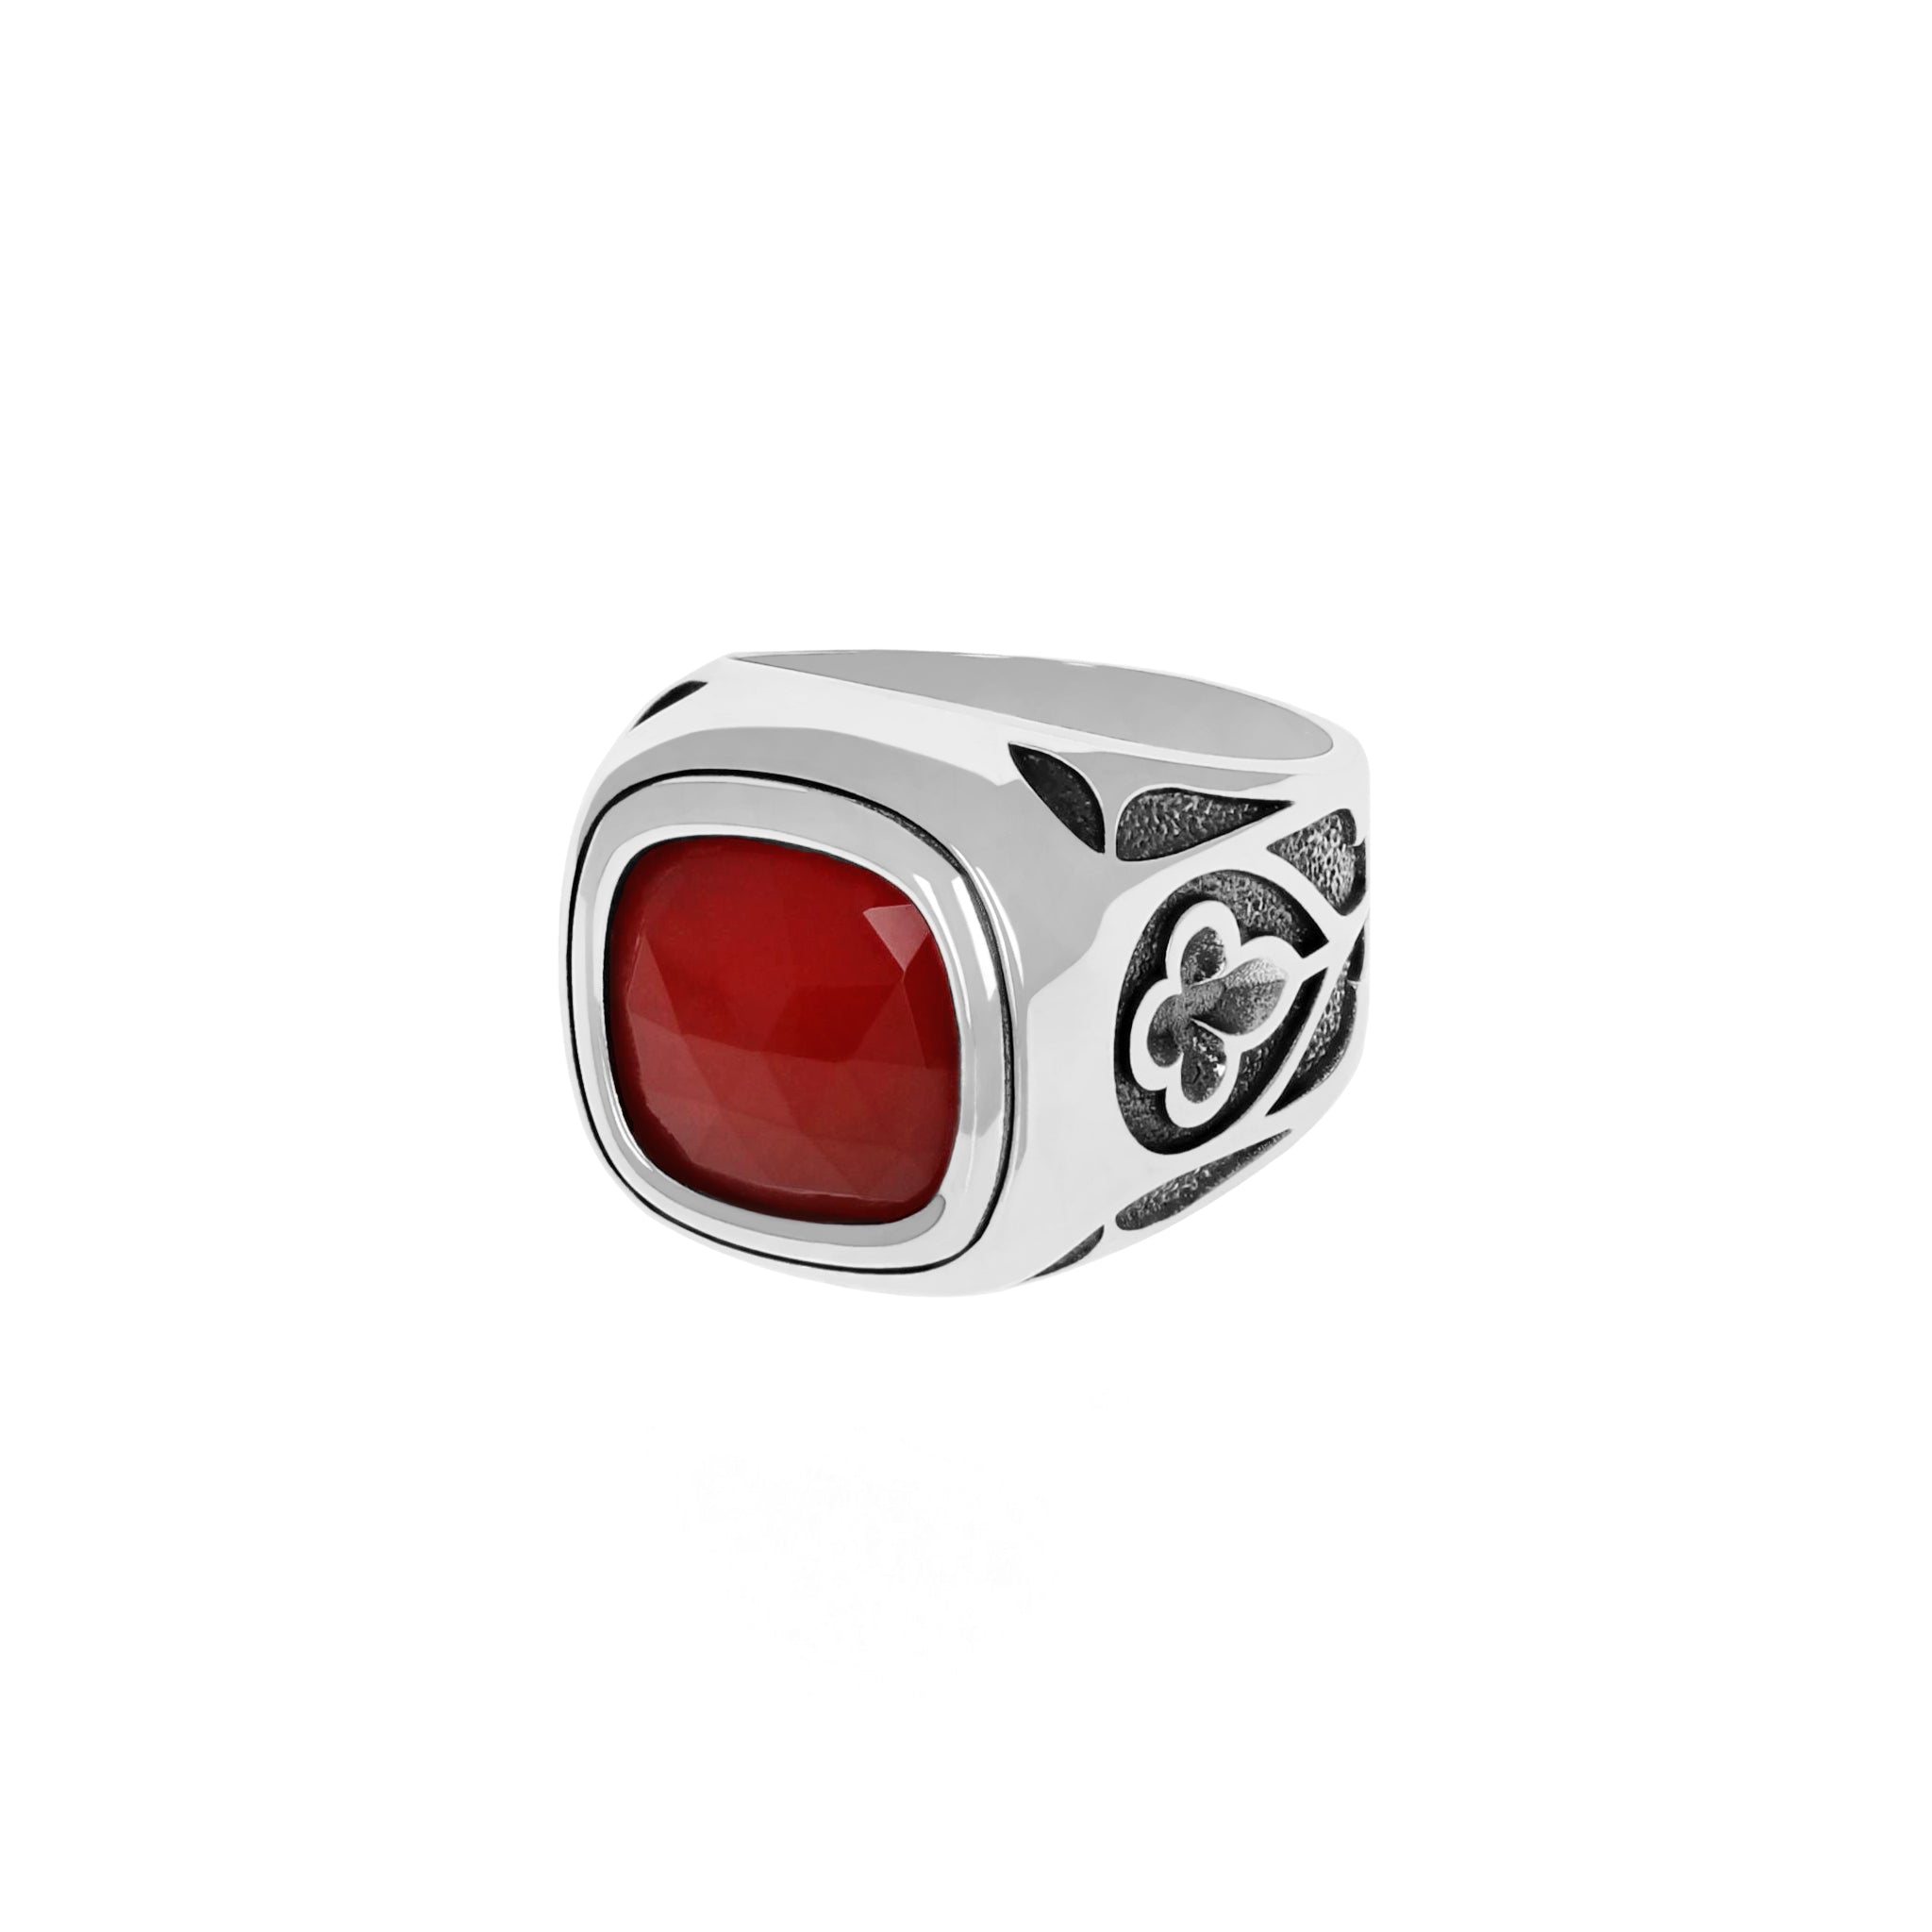 Rounded Square Carnelian Stone Ring w/ Relic Cross Detail